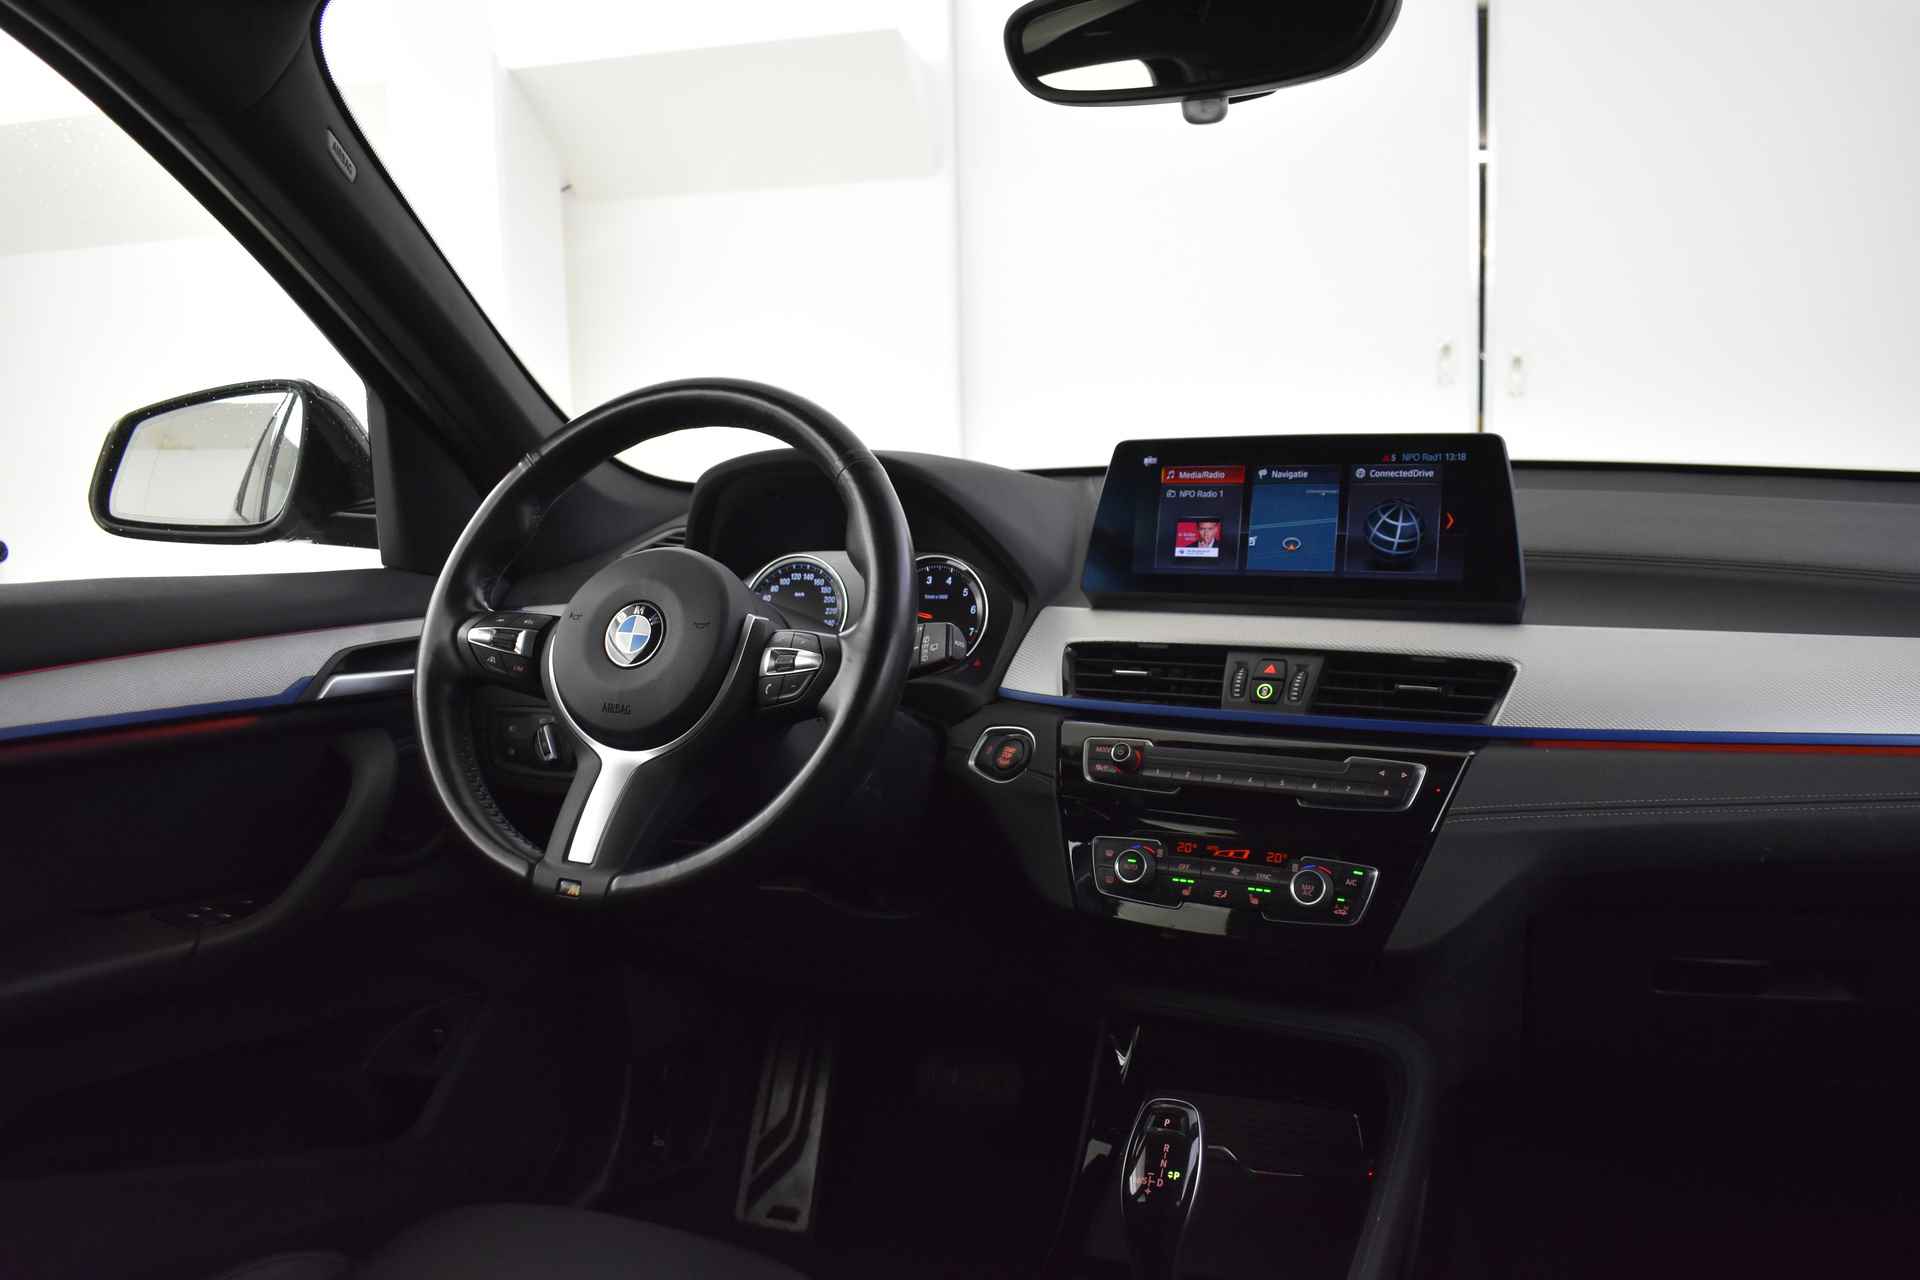 BMW X1 sDrive20i Executive M Sport Automaat / Sportstoelen / Adaptieve LED / Active Cruise Control / Achteruitrijcamera / Head-Up / Park Assistant / Driving Assistant Plus - 11/47